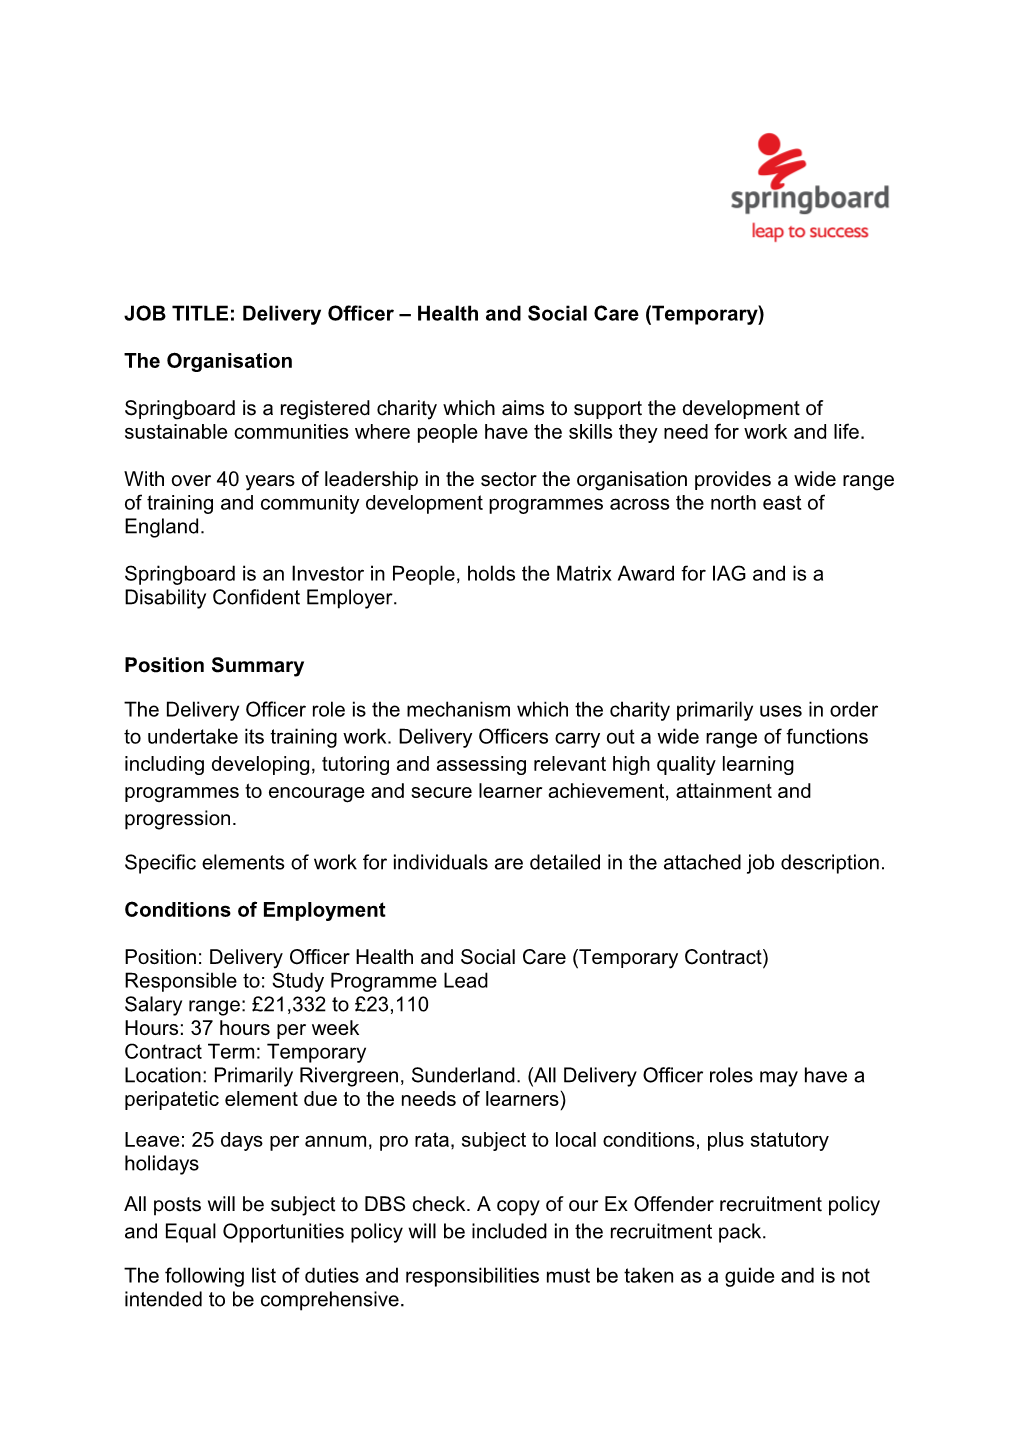 JOB TITLE: Delivery Officer Health and Social Care (Temporary)